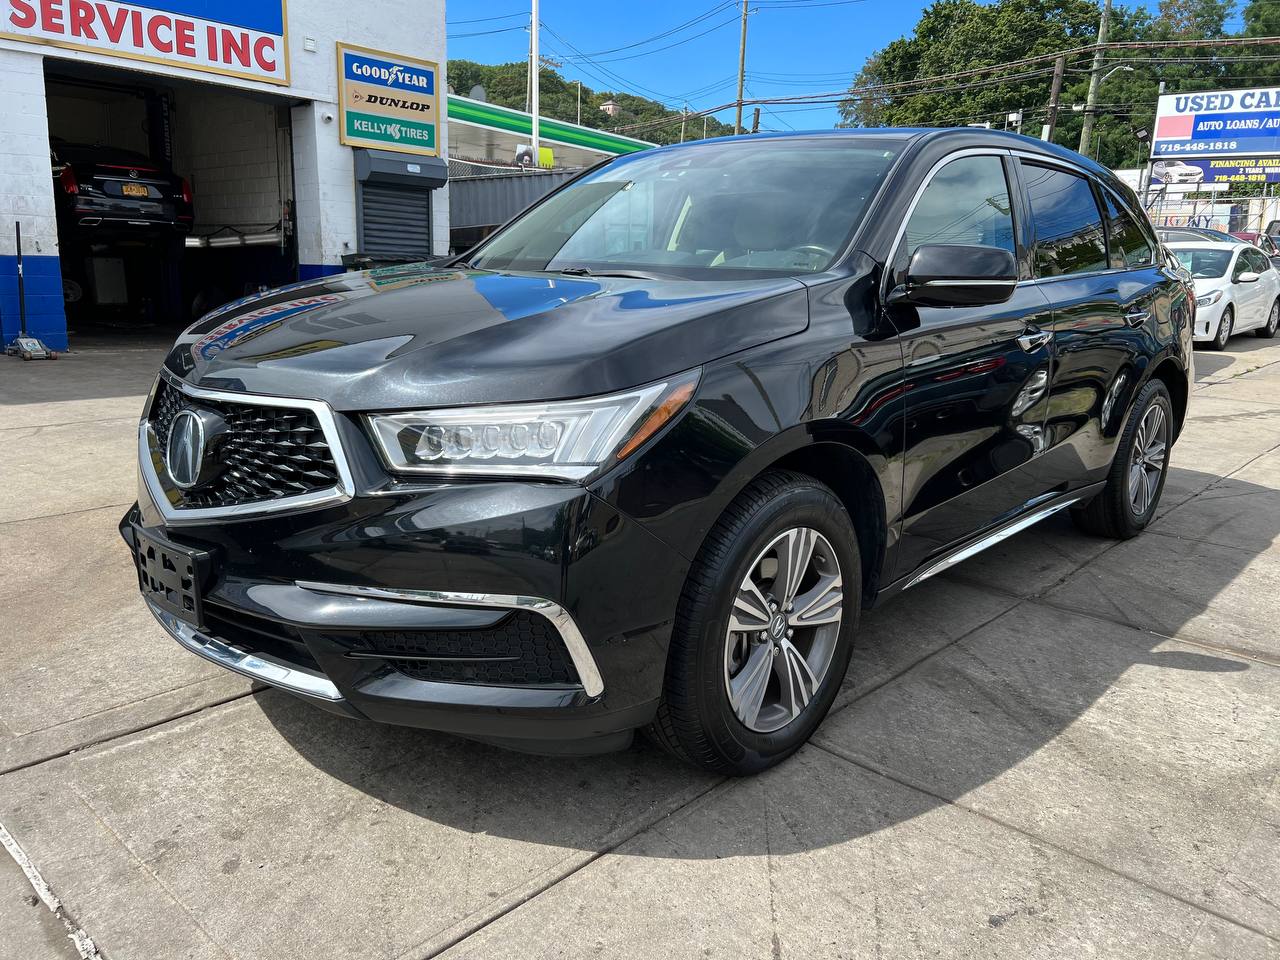 Used Car - 2019 Acura MDX for Sale in Staten Island, NY